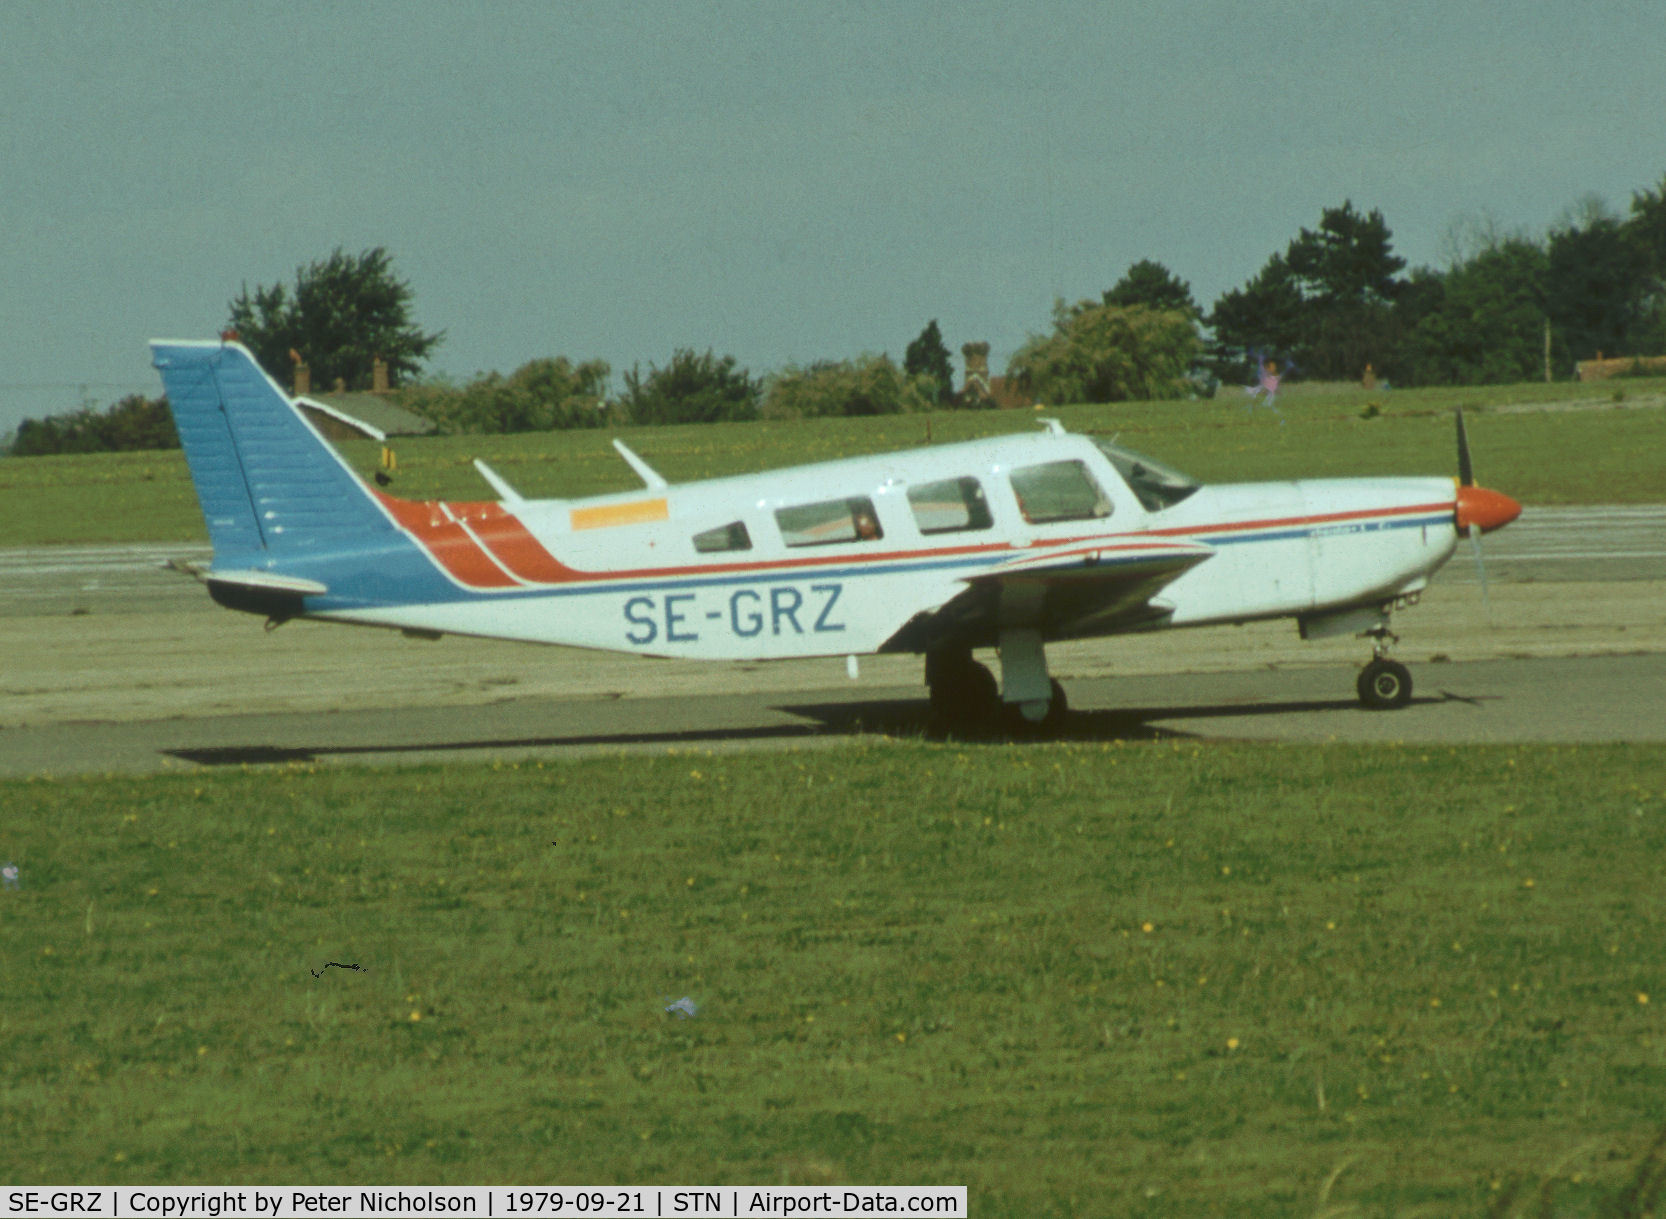 SE-GRZ, 1976 Piper PA-32R-300 Cherokee Lance C/N 32R-7680231, PA-32R Cherokee Lance as seen at Stansted in September 1979.